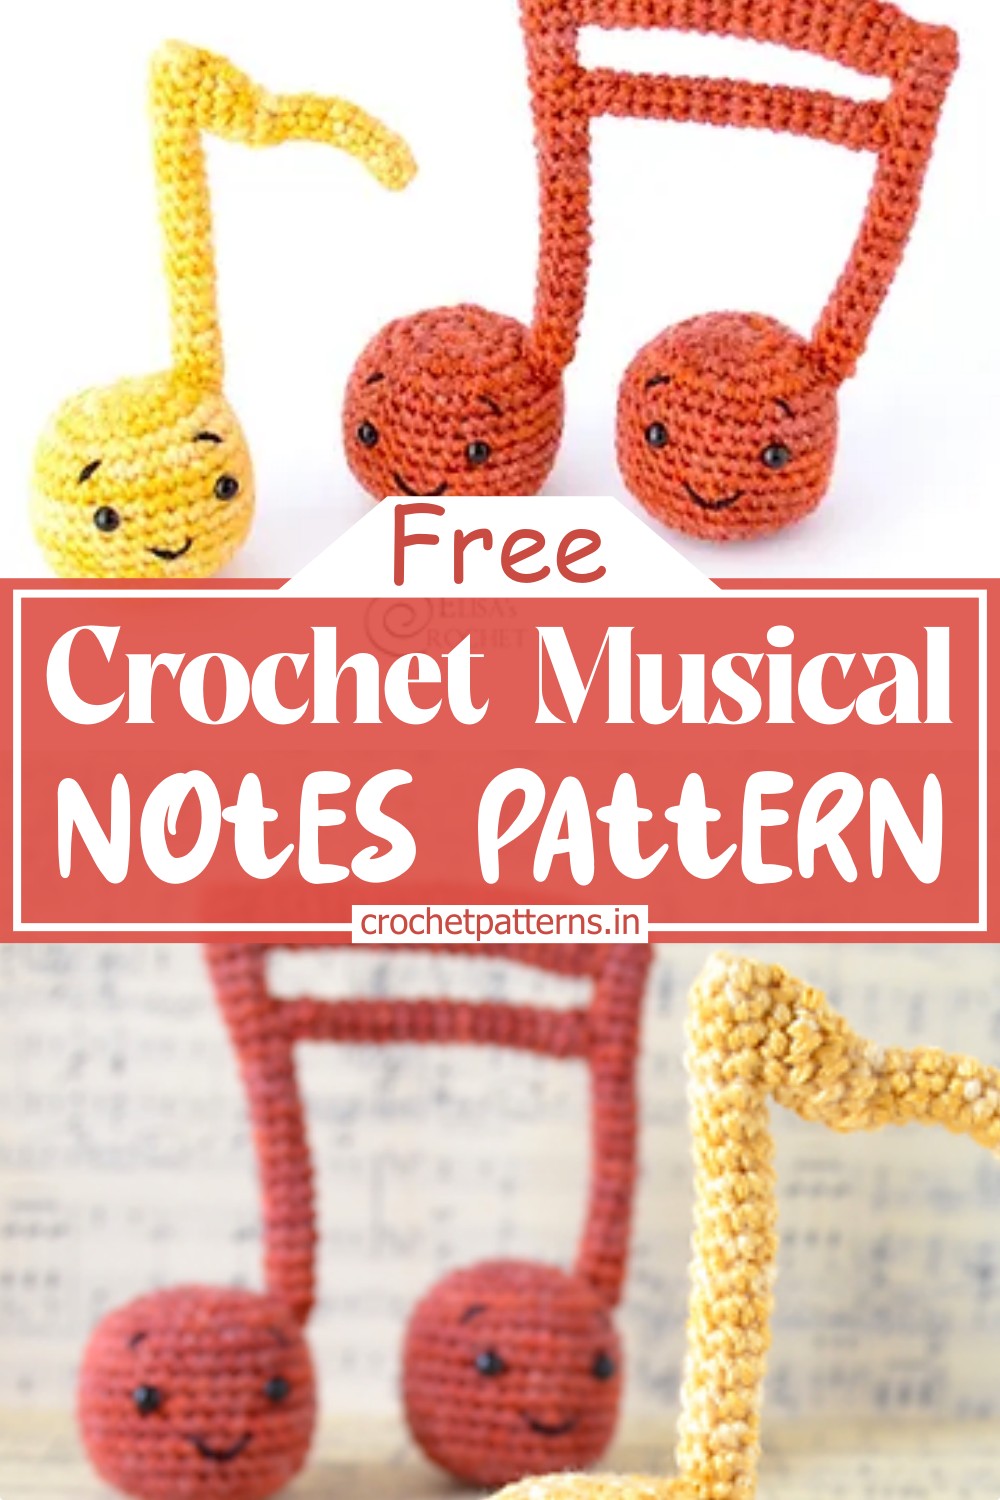 Free Crochet Musical Notes Pattern